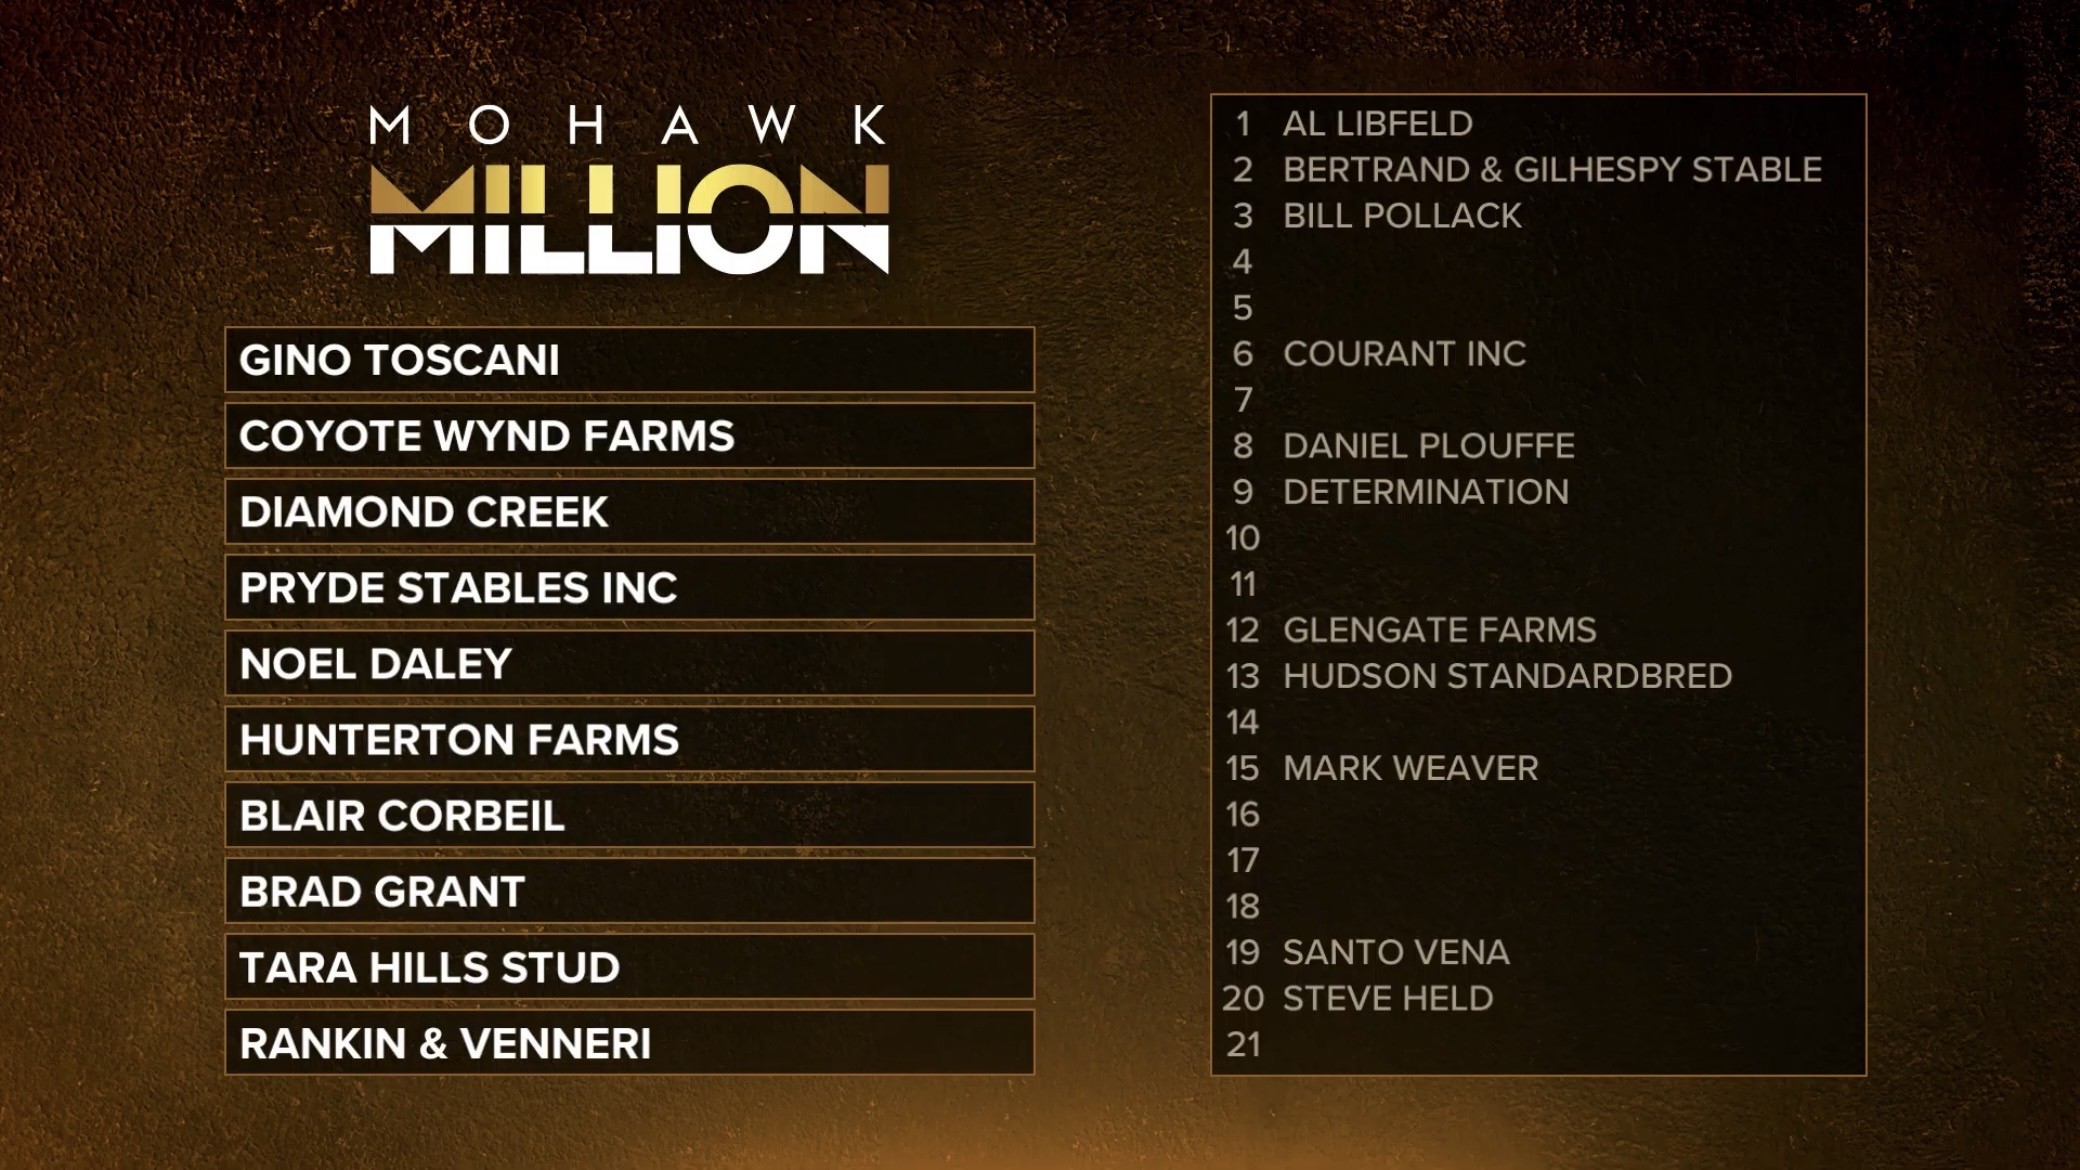 Mohawk Million slot draw concluded